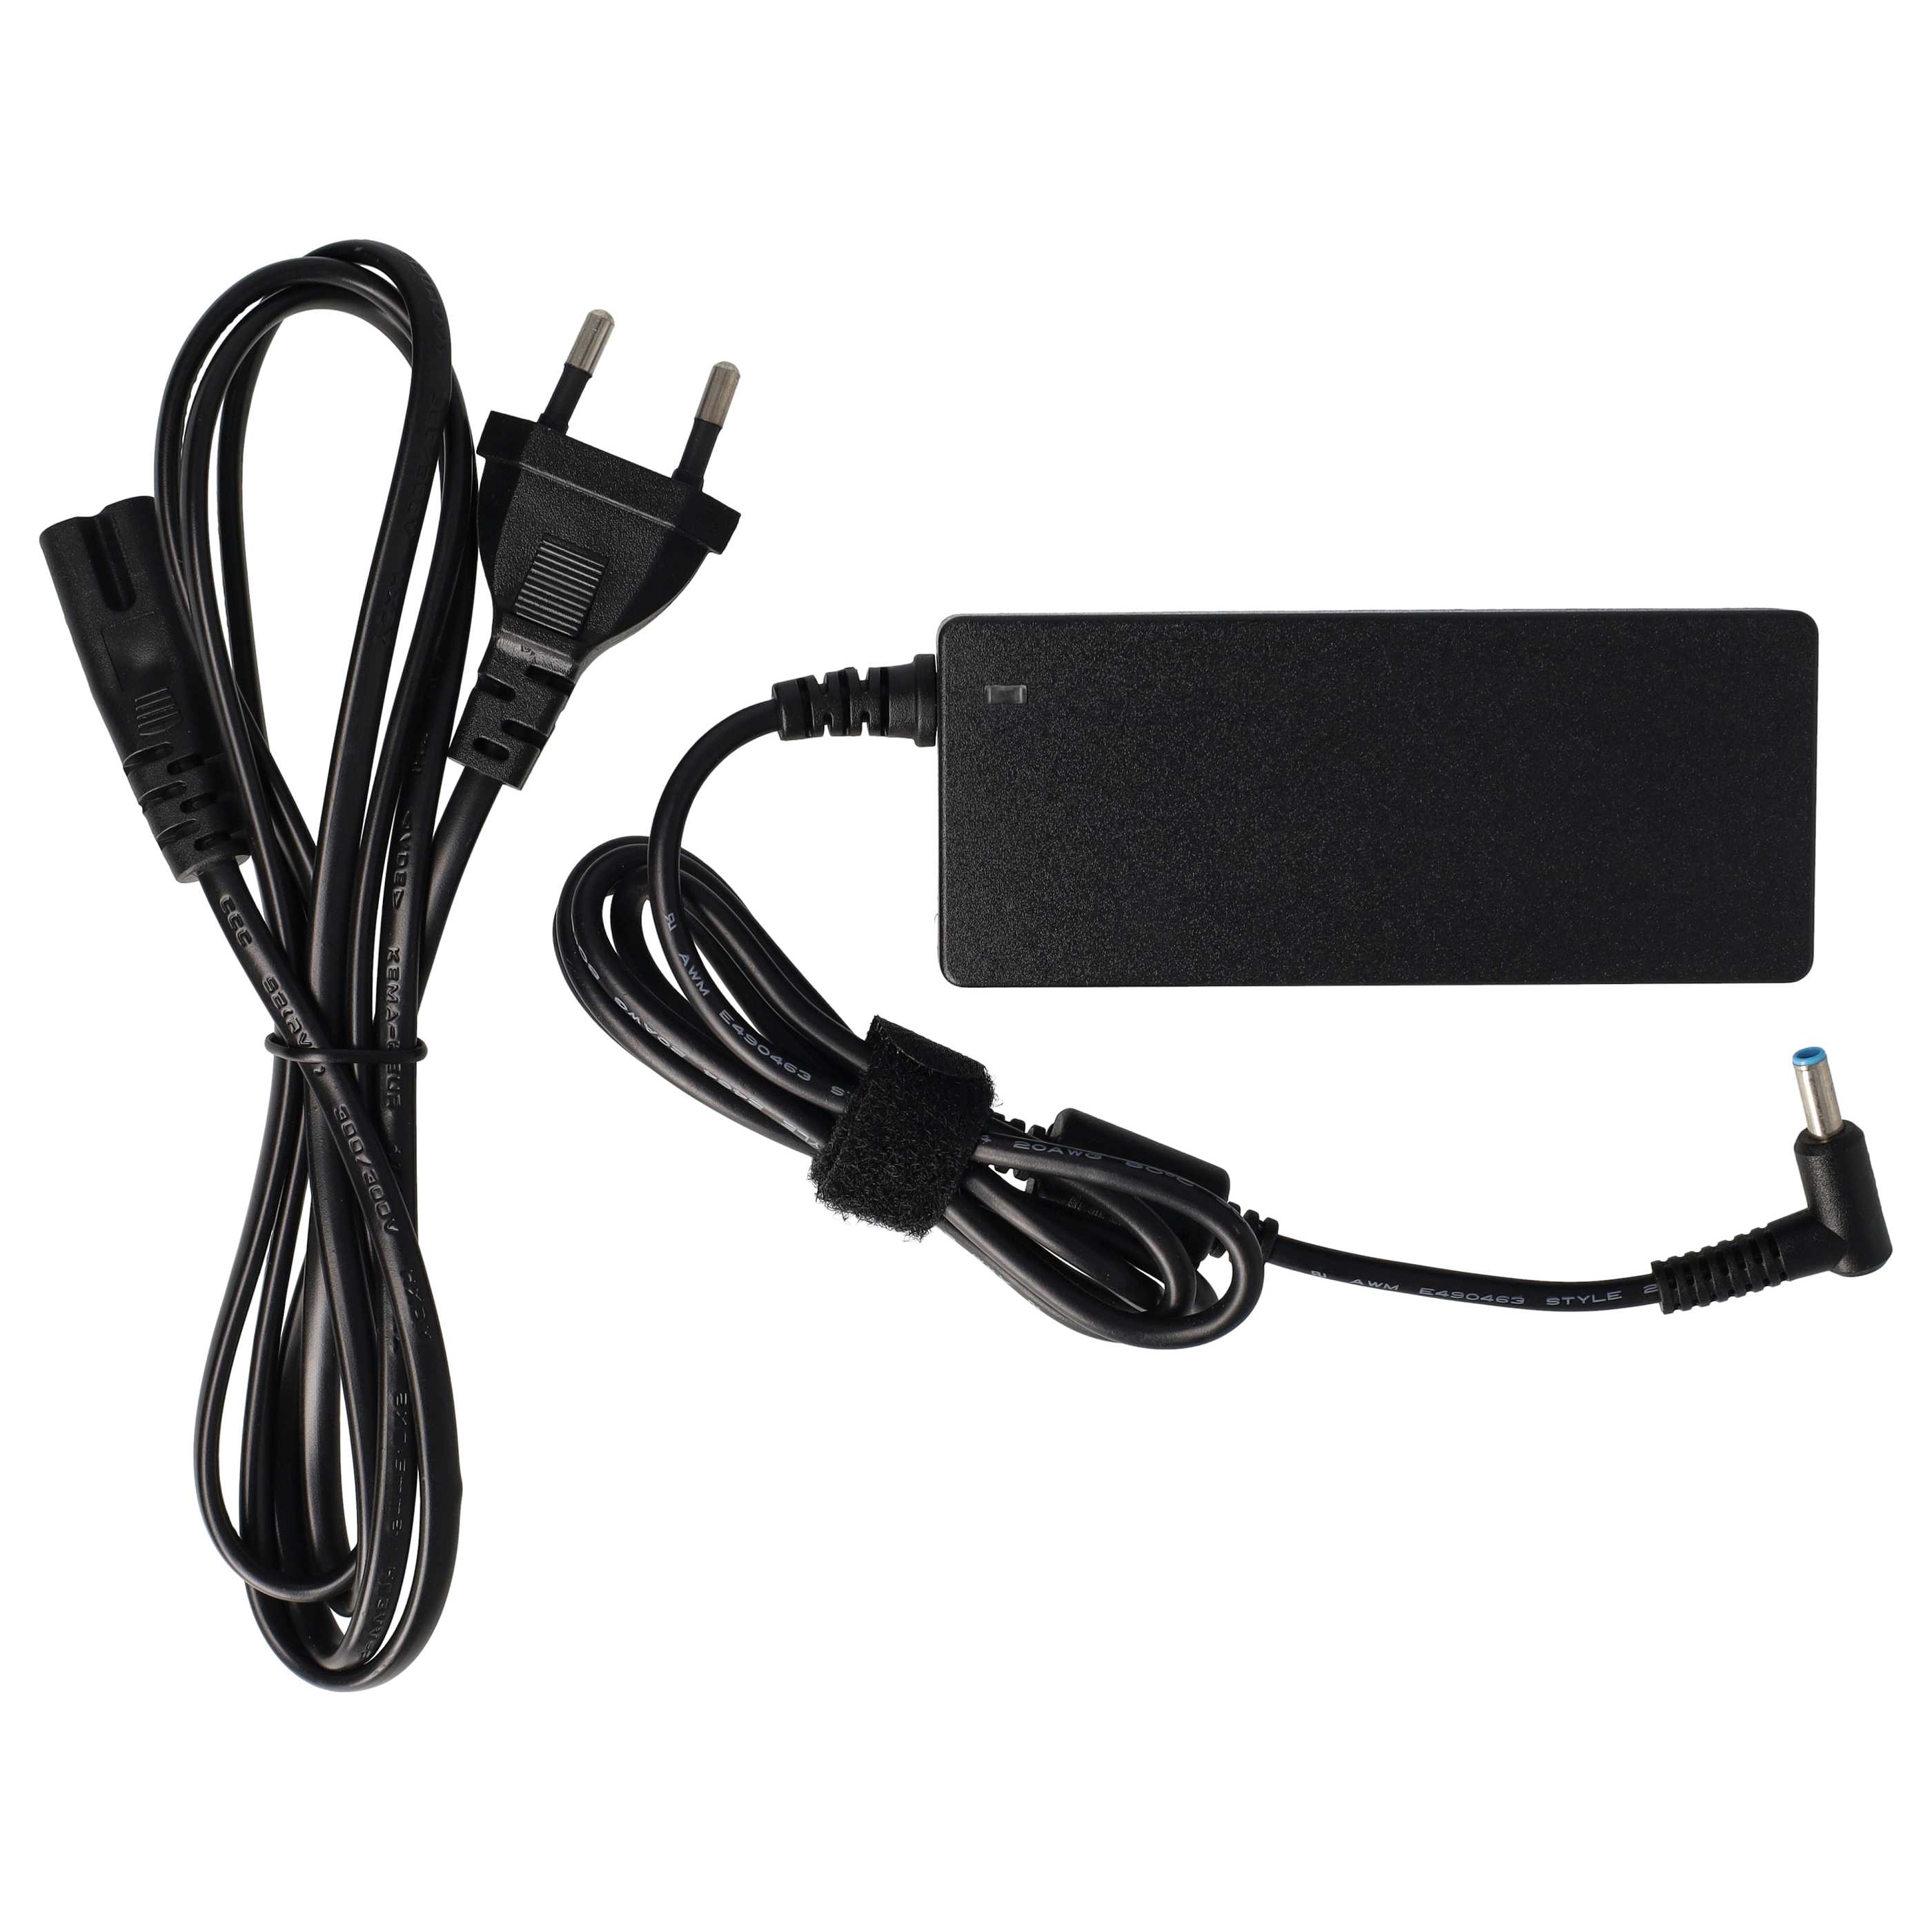 Mains Power Adapter replaces HP PP009C for HPNotebook etc., 65 W